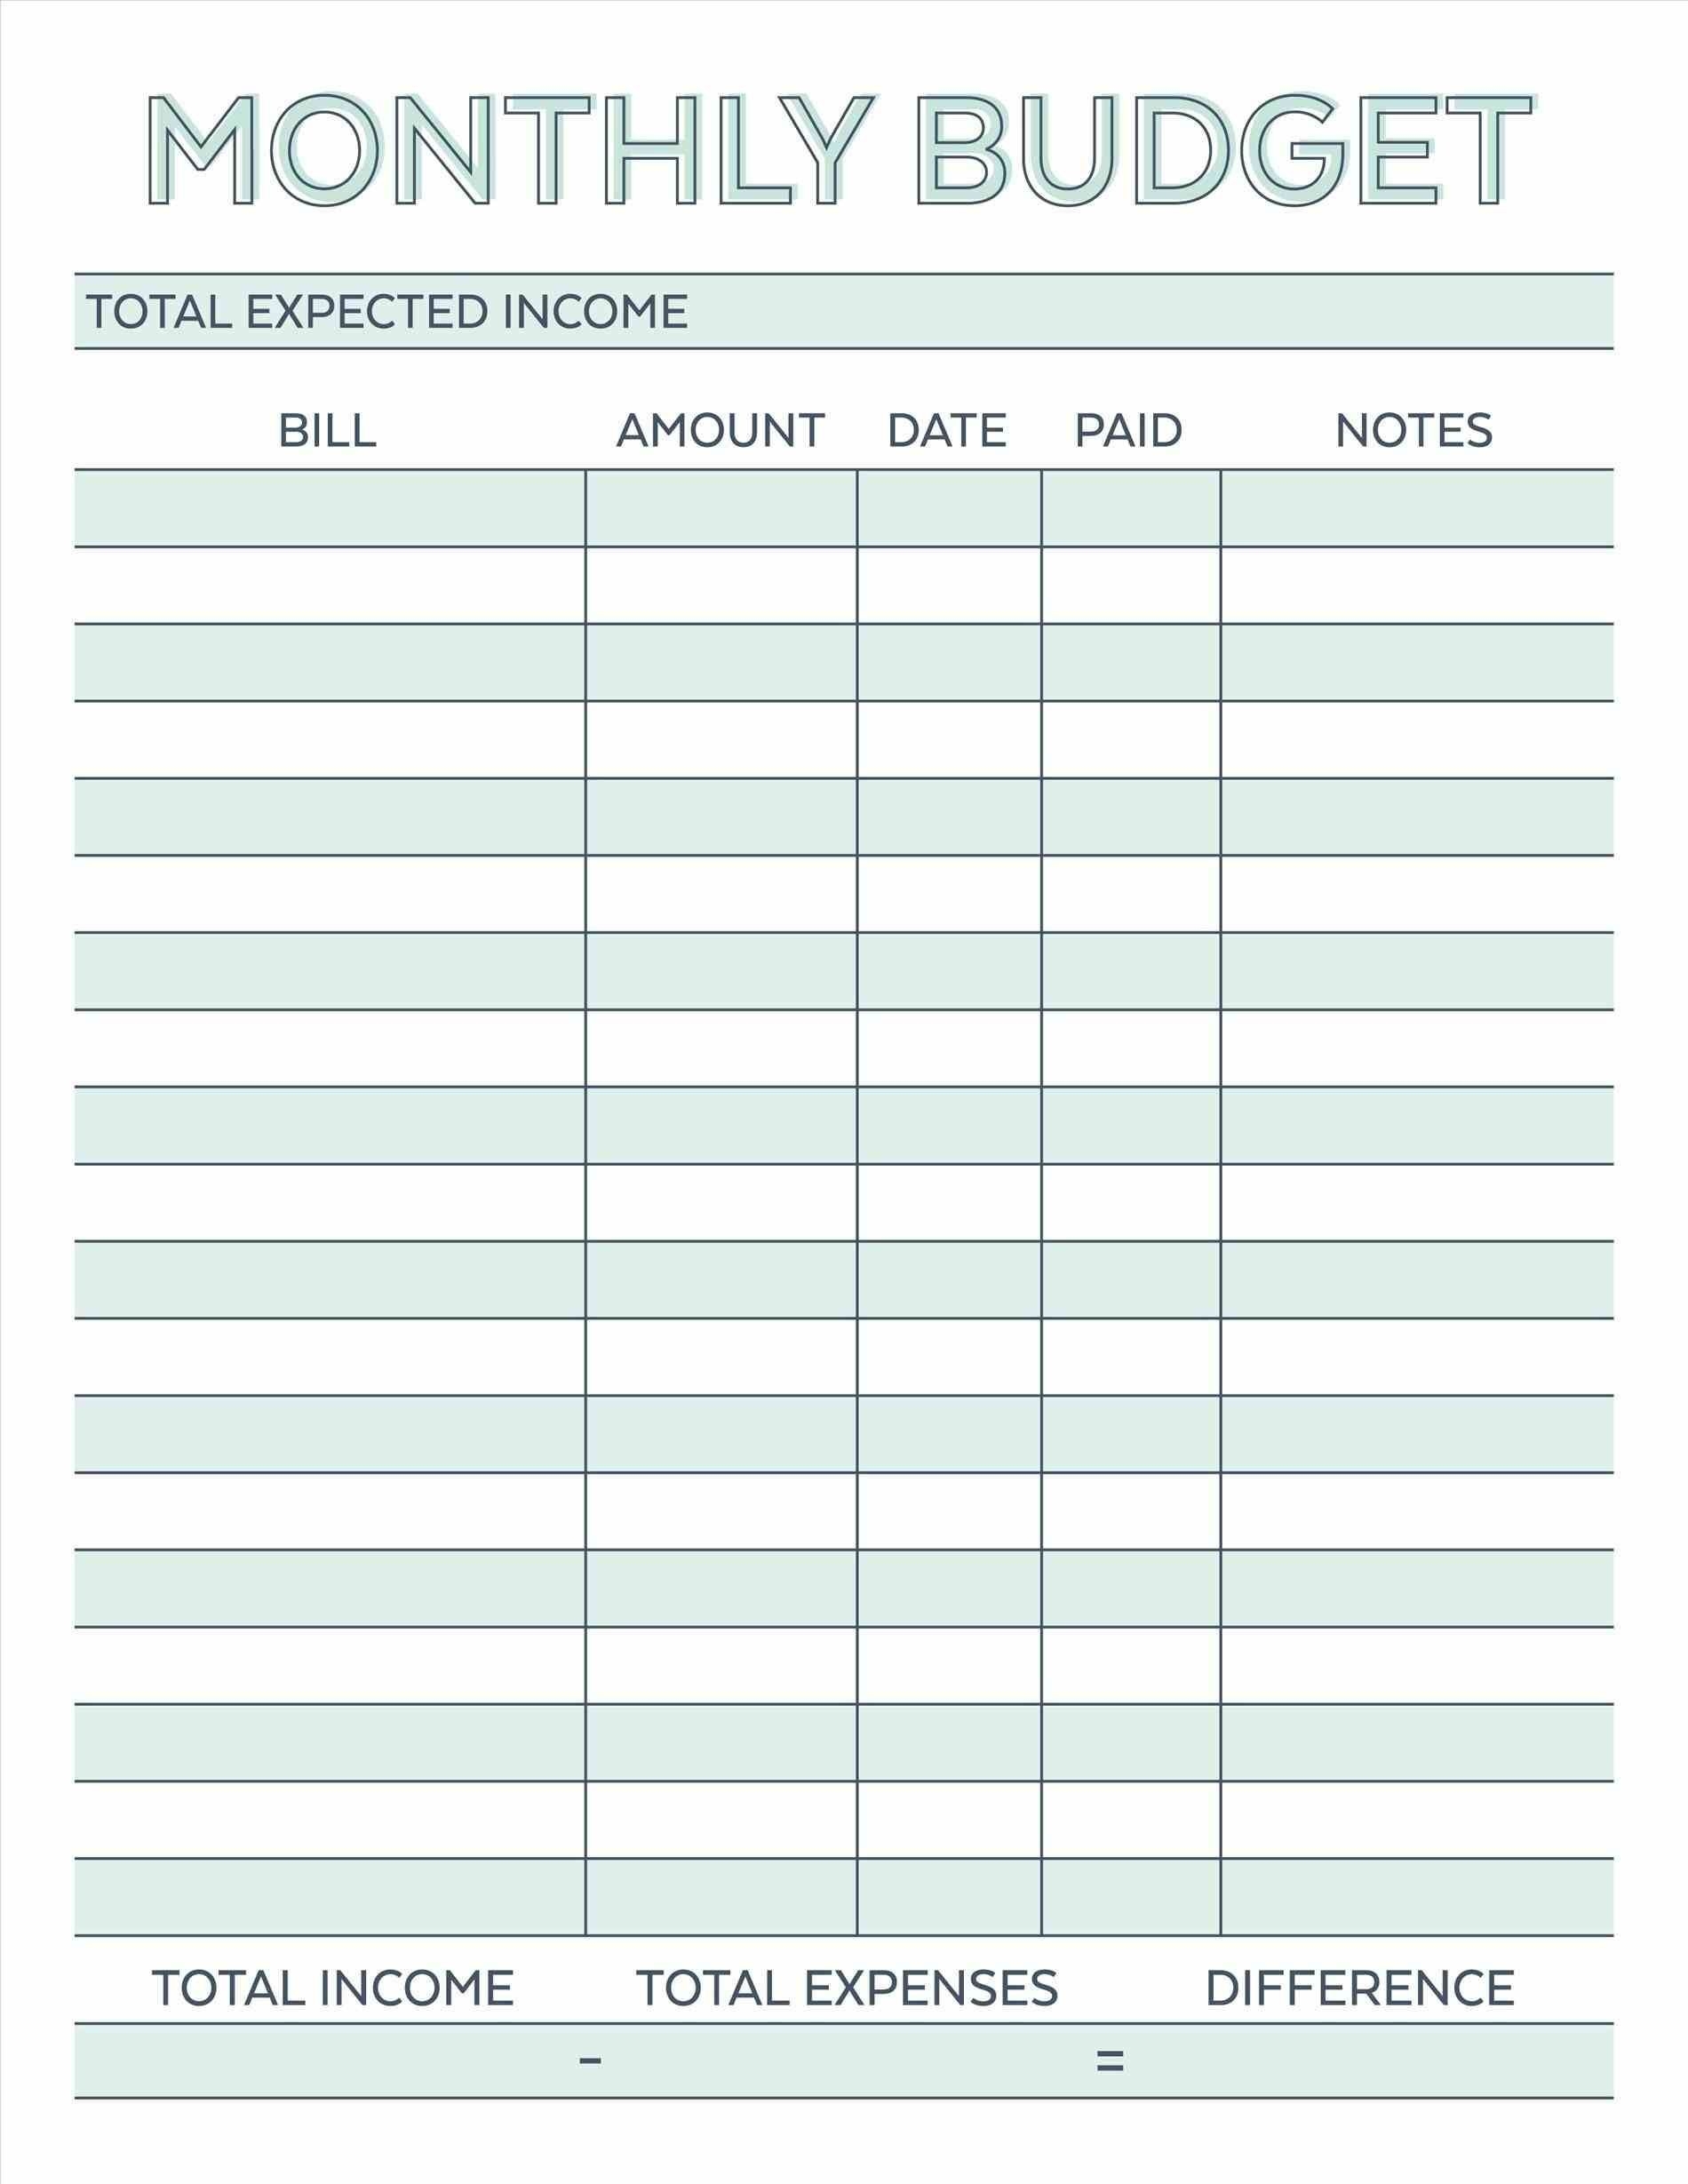 Image Result For Free Monthly Budget Template | Budget  Free Printable Monthly Bill Sheet